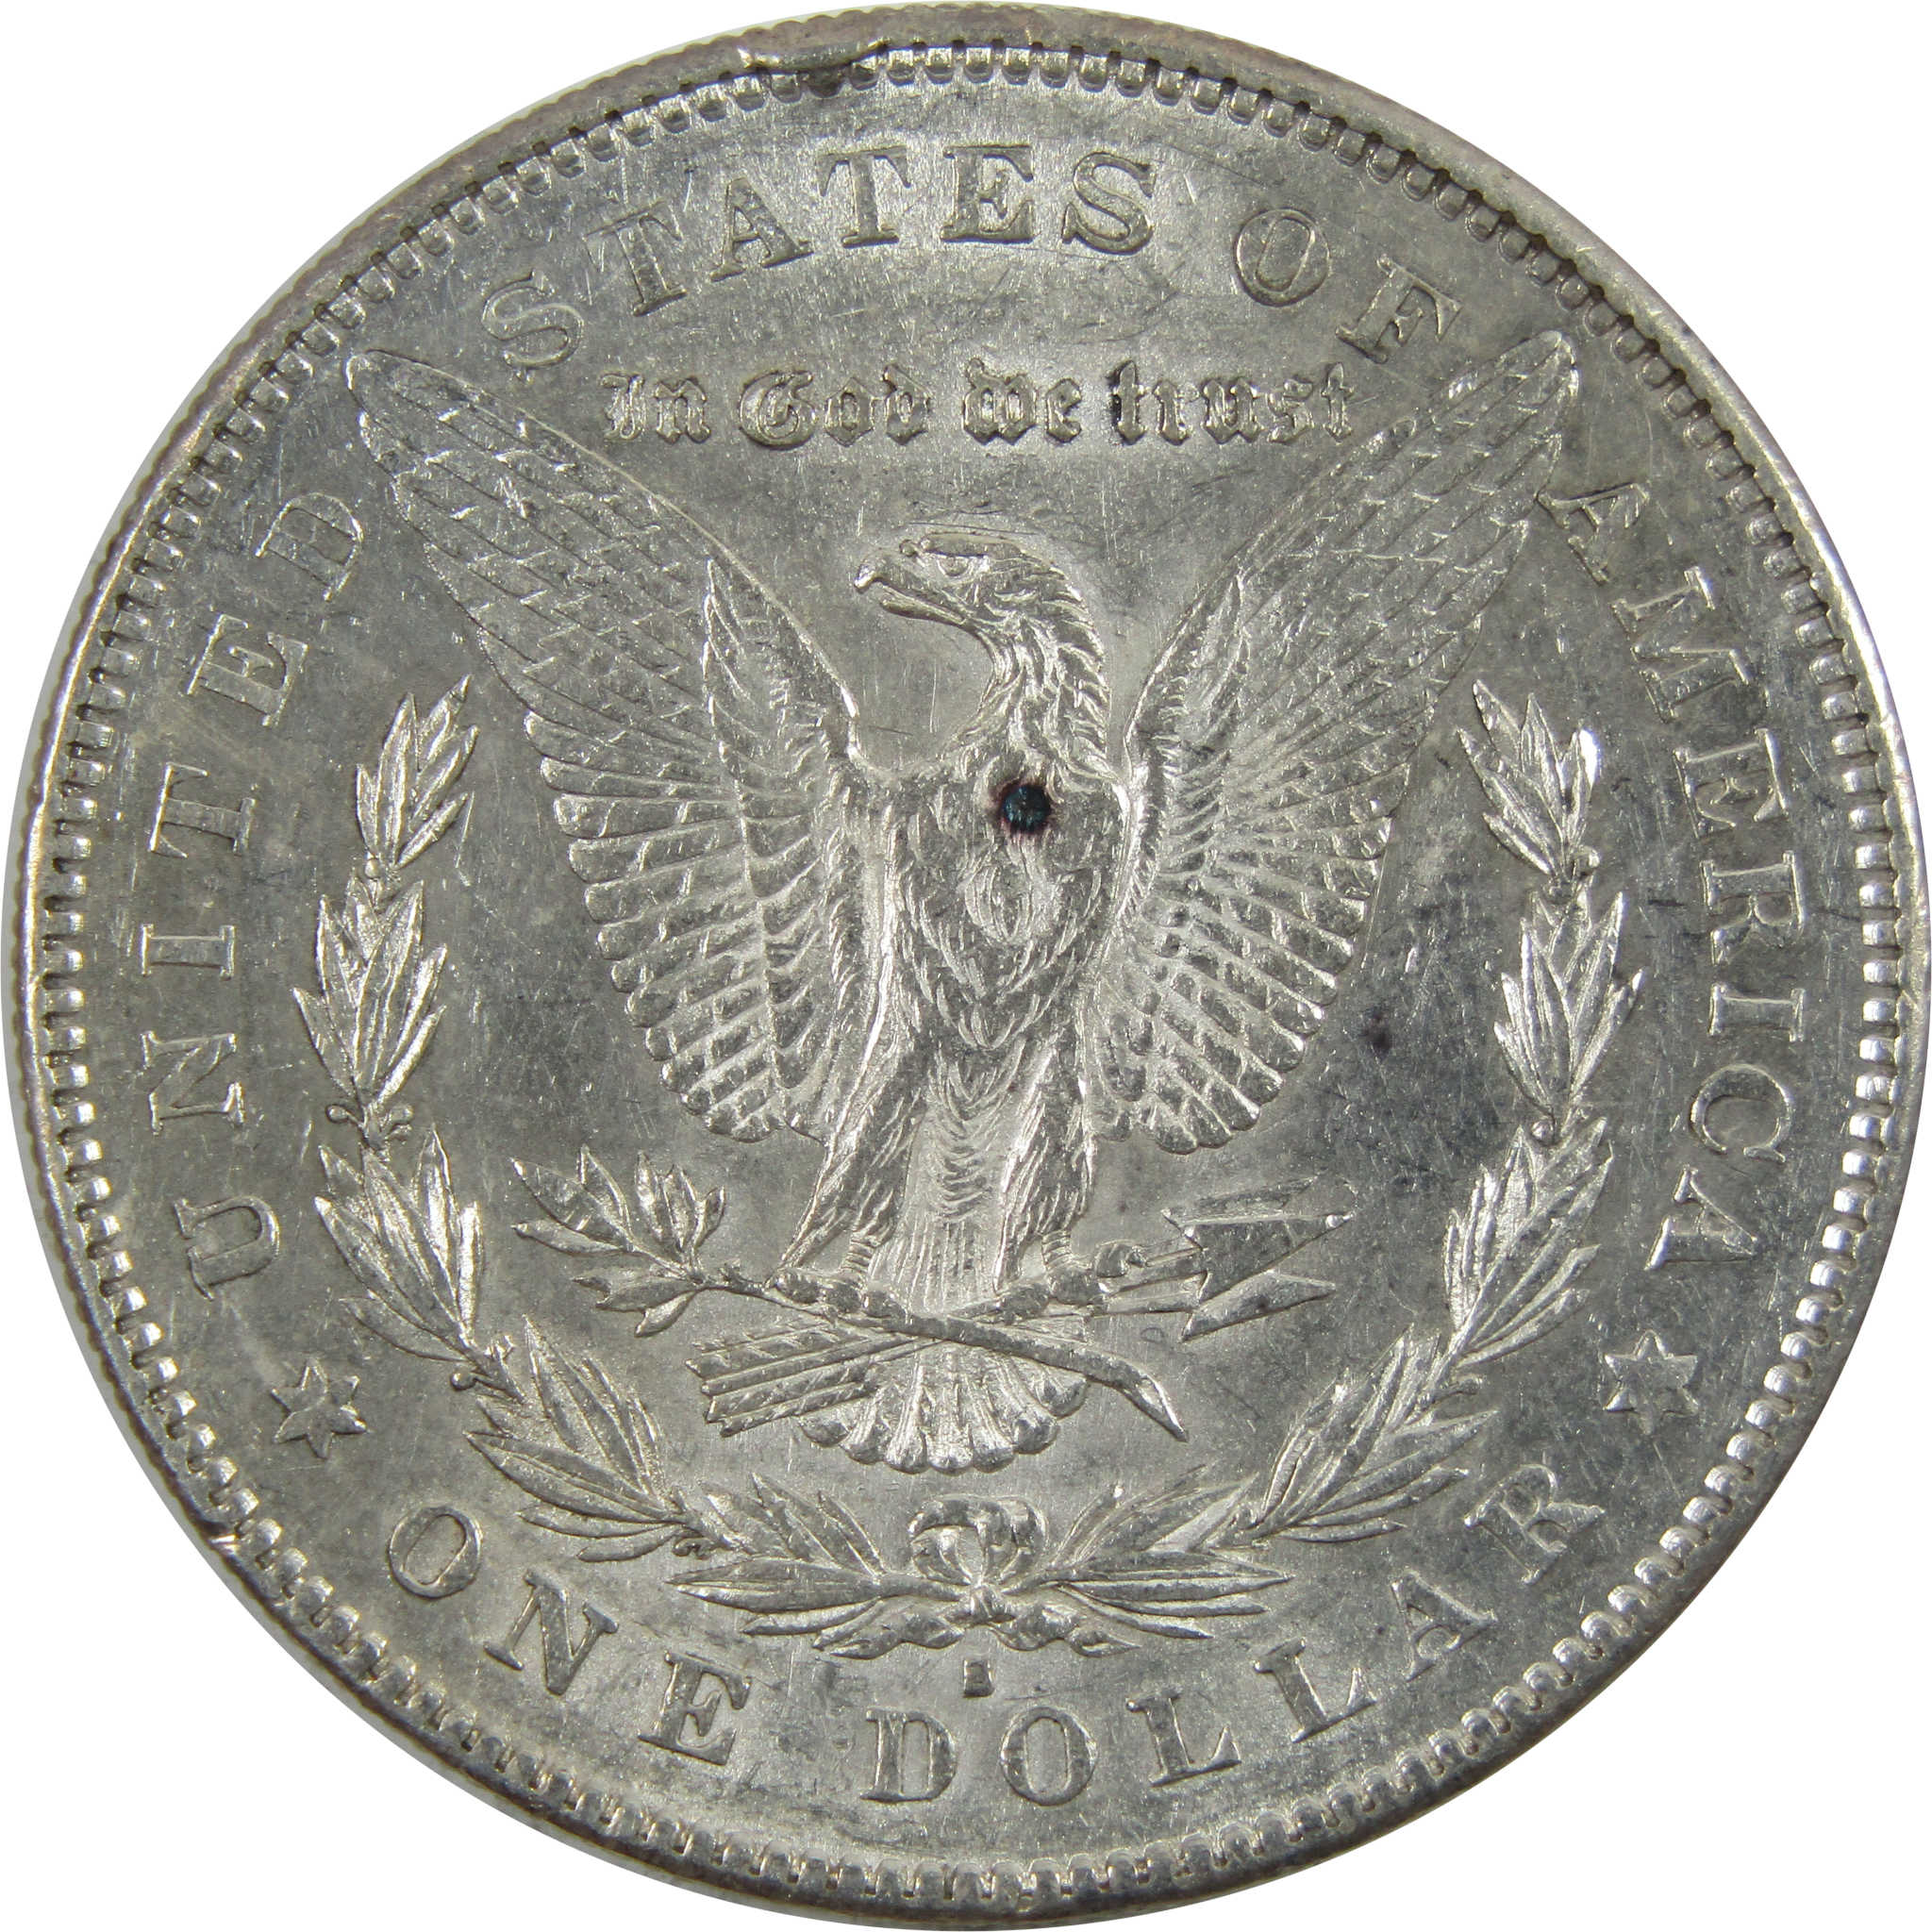 1879 S Morgan Dollar AU About Uncirculated 90% Silver $1 SKU:I5063 - Morgan coin - Morgan silver dollar - Morgan silver dollar for sale - Profile Coins &amp; Collectibles